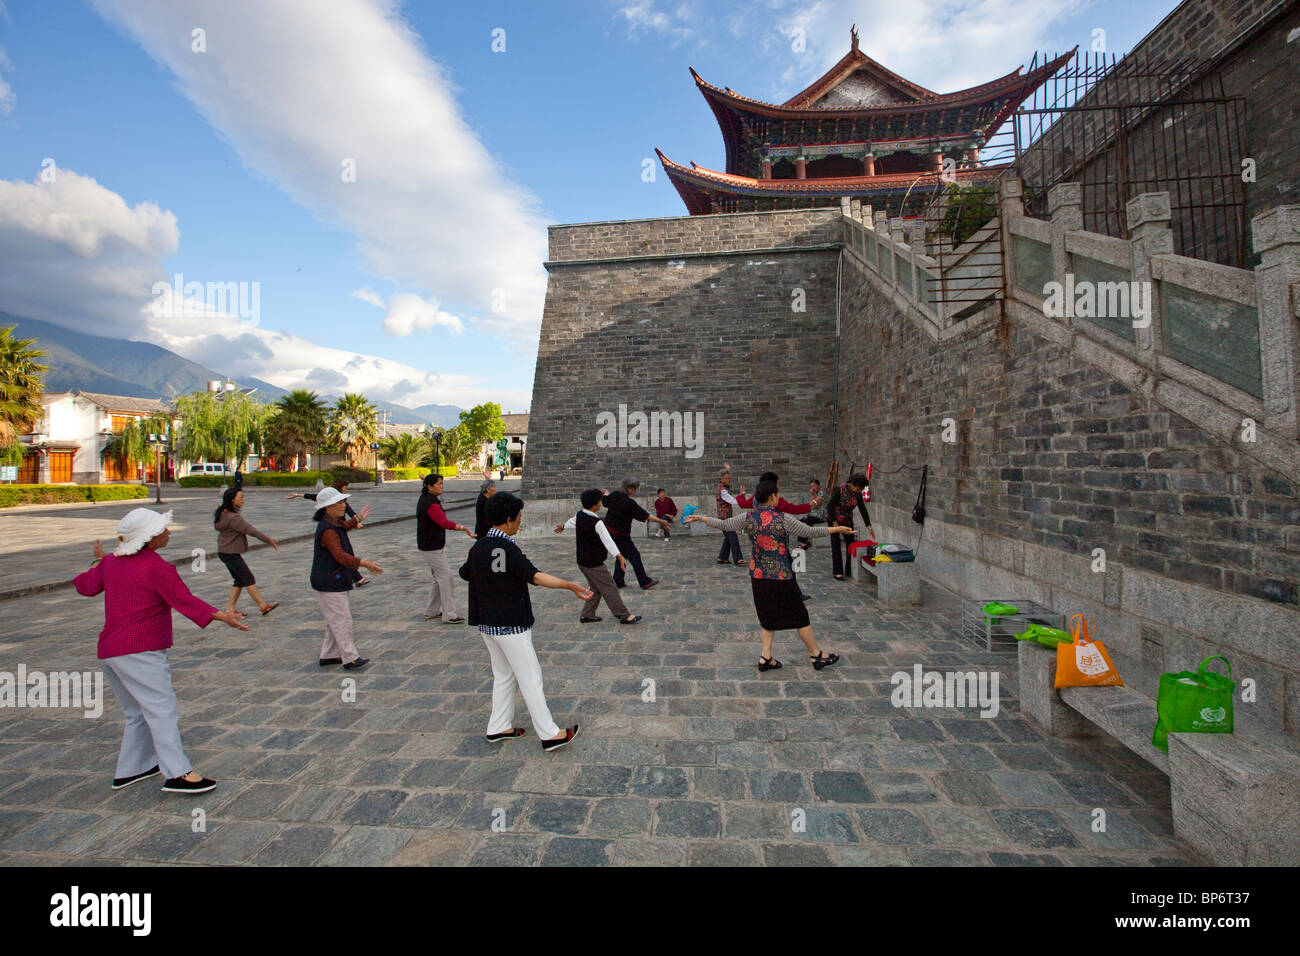 Women exercising in the morning, North Gate of the Old City Walls in Dali, China Stock Photo